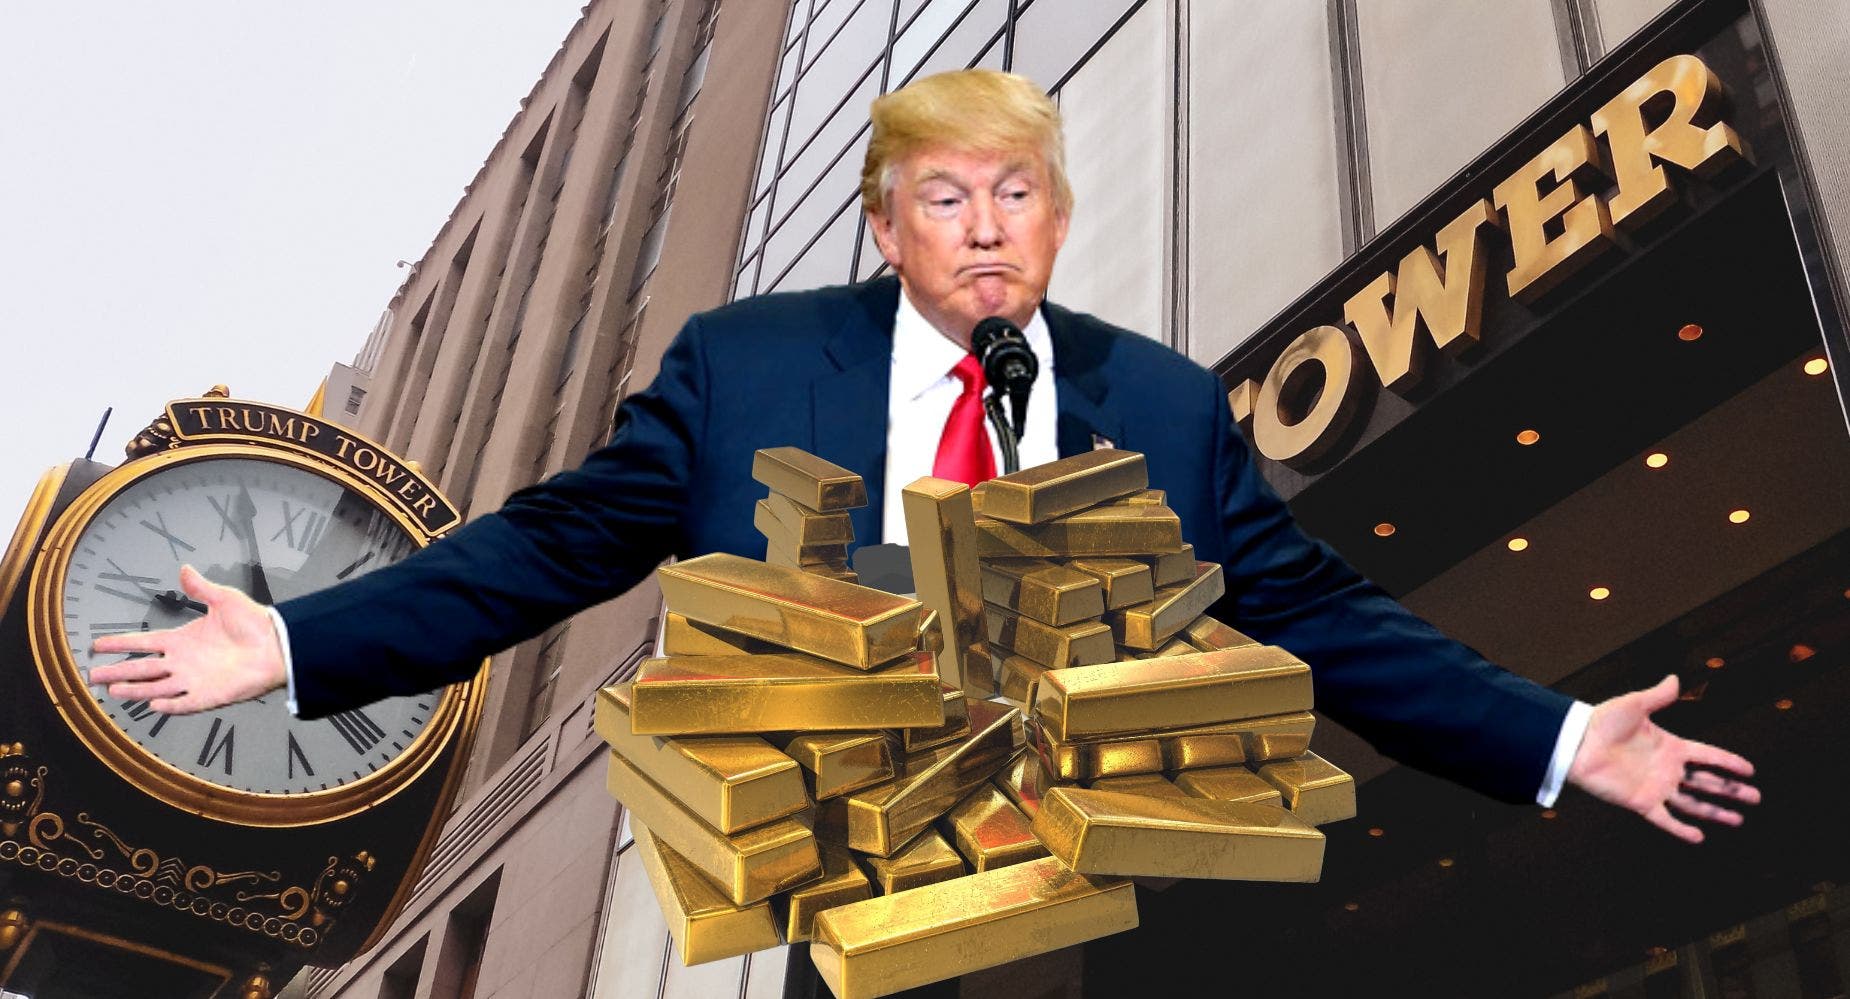 Trump Received Payment In Gold Bars Wheeled To His Apartment, Among Revelations In New Book